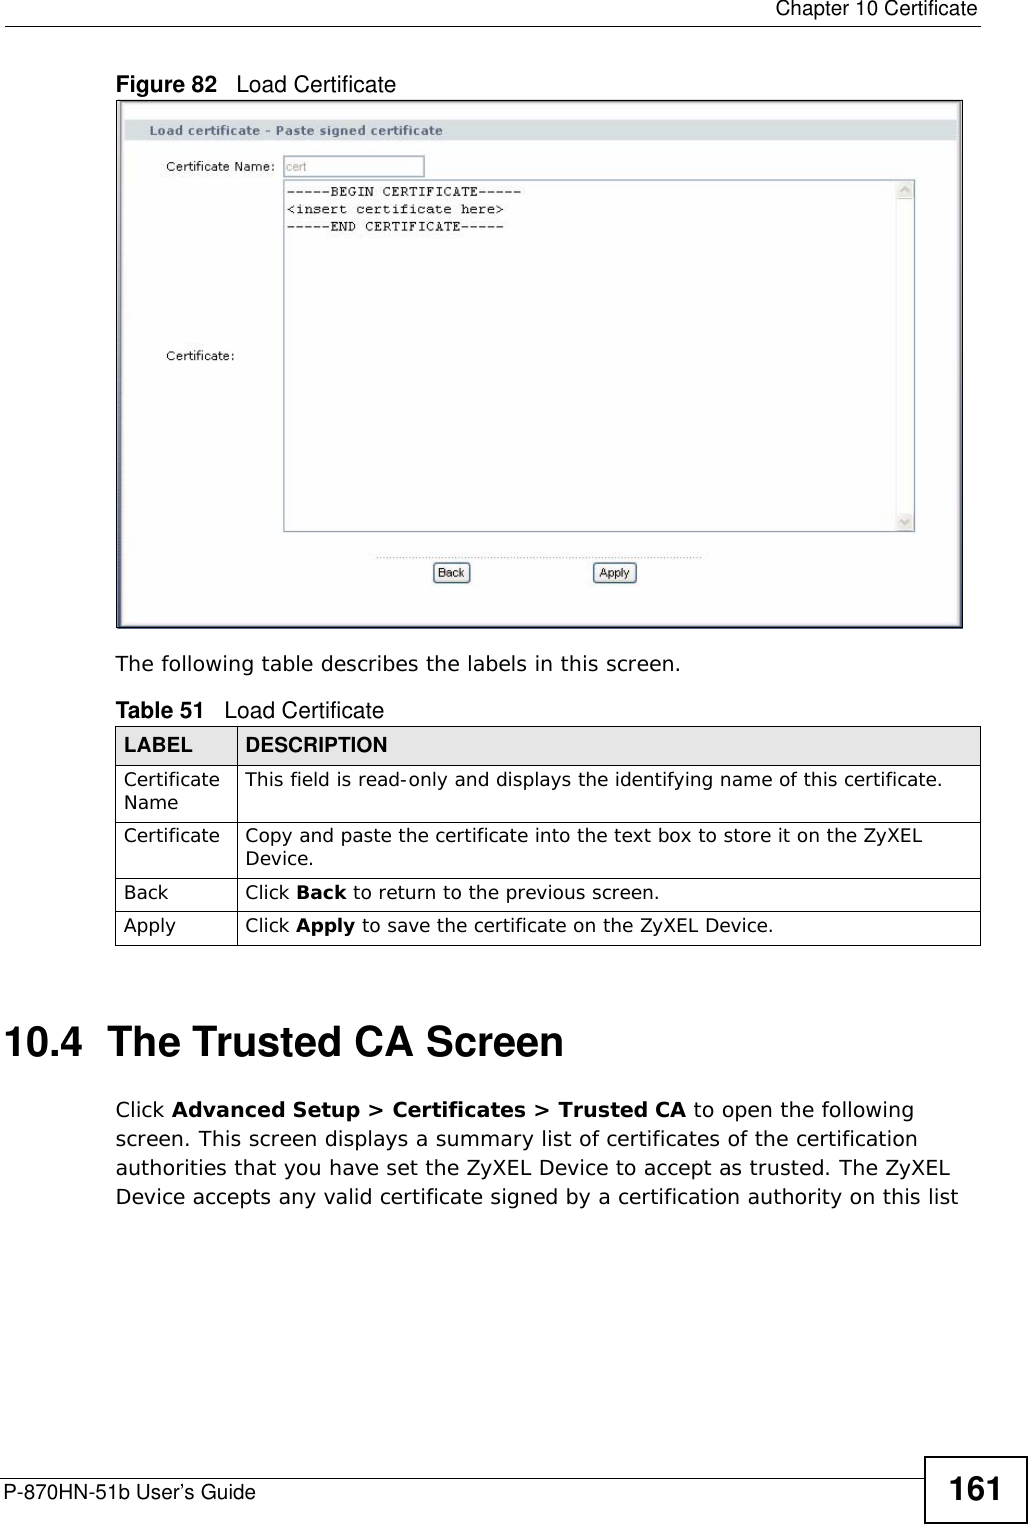  Chapter 10 CertificateP-870HN-51b User’s Guide 161Figure 82   Load Certificate The following table describes the labels in this screen. 10.4  The Trusted CA ScreenClick Advanced Setup &gt; Certificates &gt; Trusted CA to open the following screen. This screen displays a summary list of certificates of the certification authorities that you have set the ZyXEL Device to accept as trusted. The ZyXEL Device accepts any valid certificate signed by a certification authority on this list Table 51   Load CertificateLABEL DESCRIPTIONCertificate Name This field is read-only and displays the identifying name of this certificate.Certificate Copy and paste the certificate into the text box to store it on the ZyXEL Device.Back Click Back to return to the previous screen.Apply Click Apply to save the certificate on the ZyXEL Device.